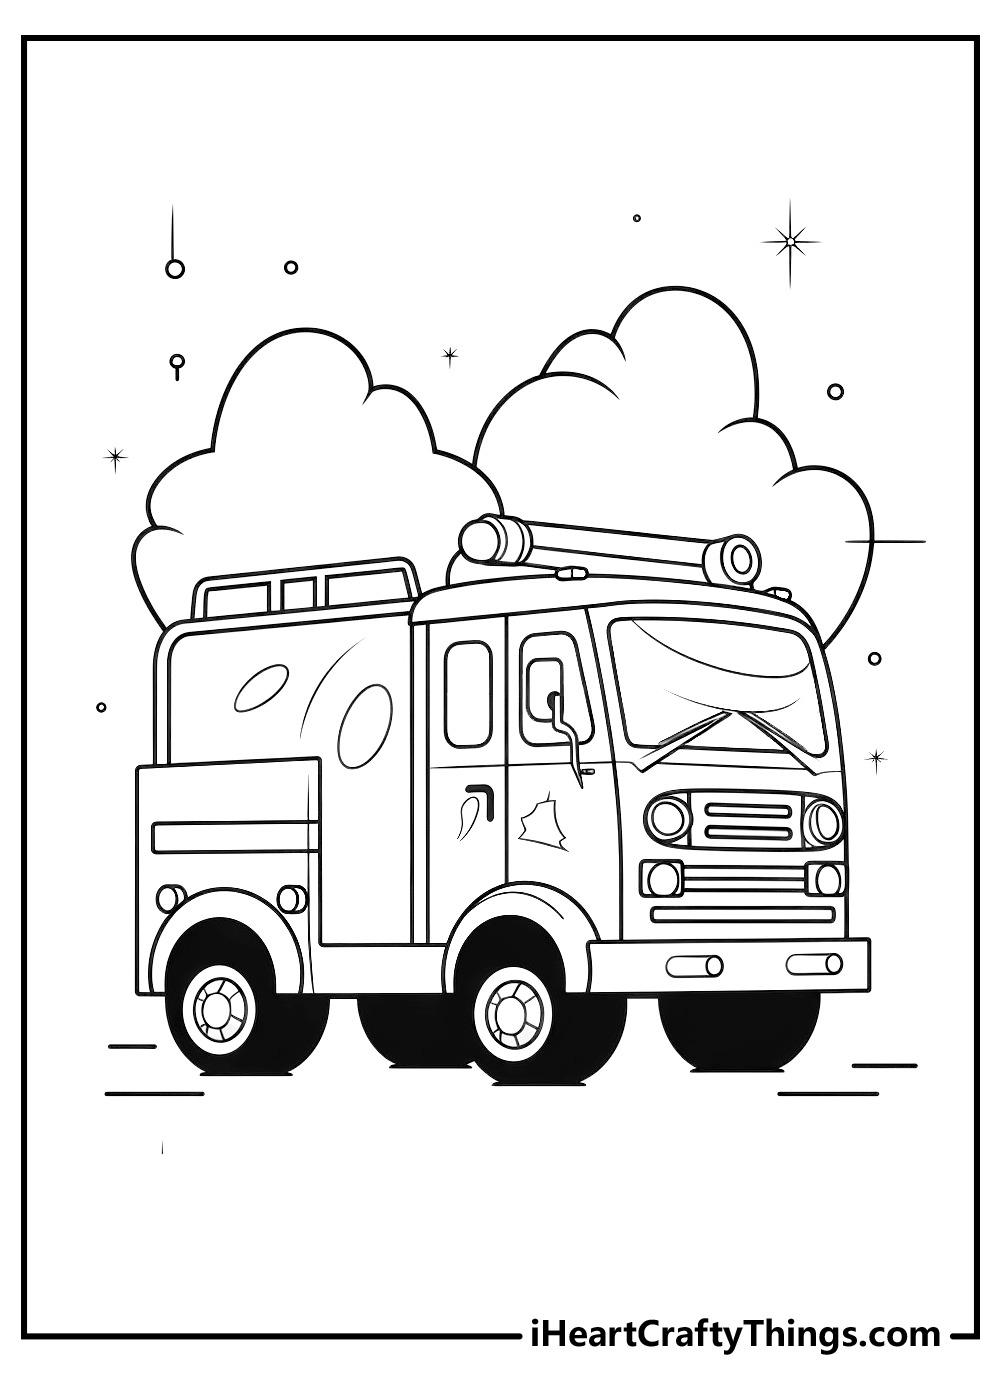 fire truck coloring sheet free download